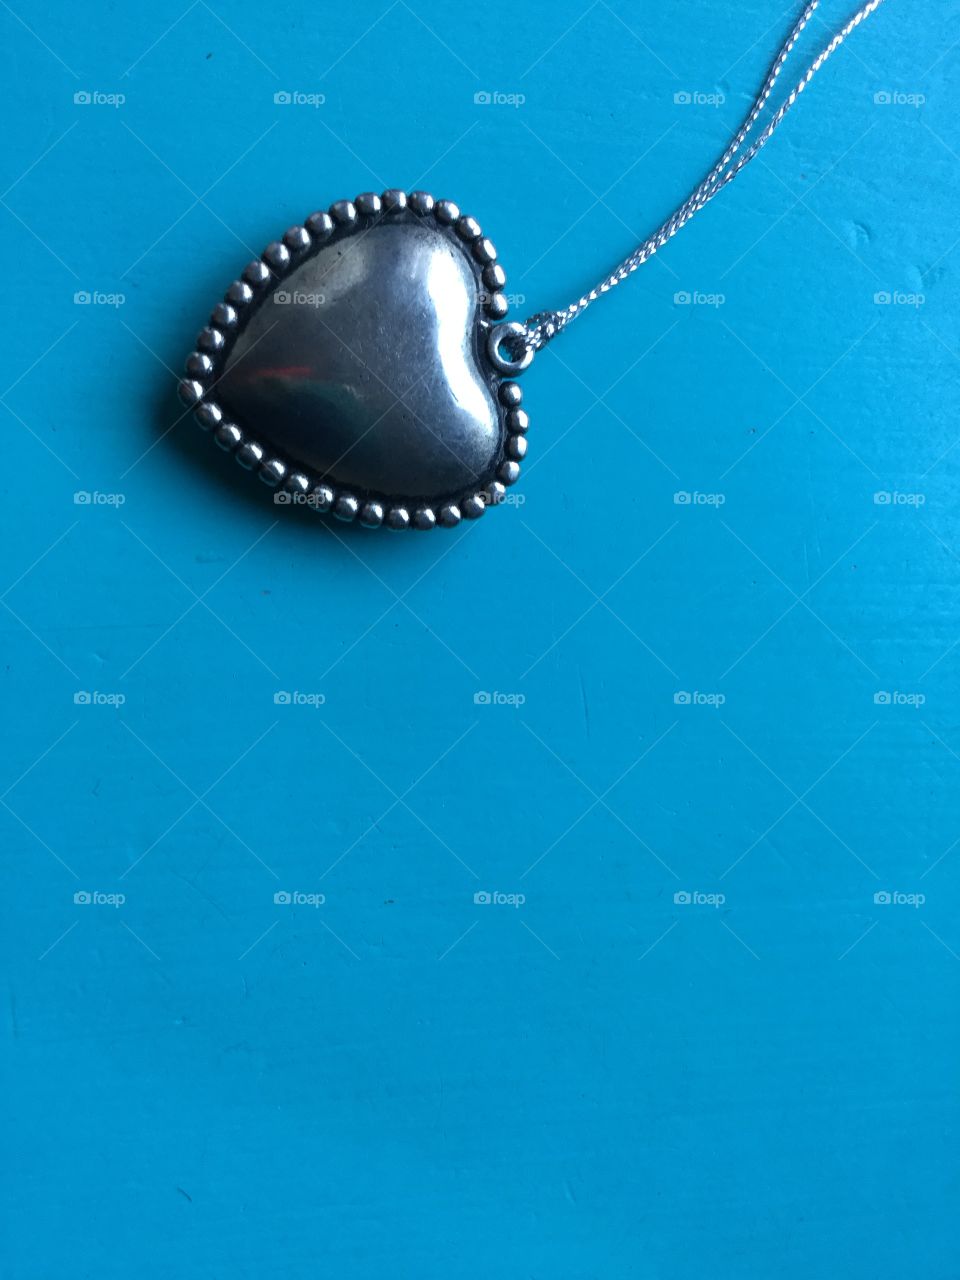 Blue background with silver heart. 